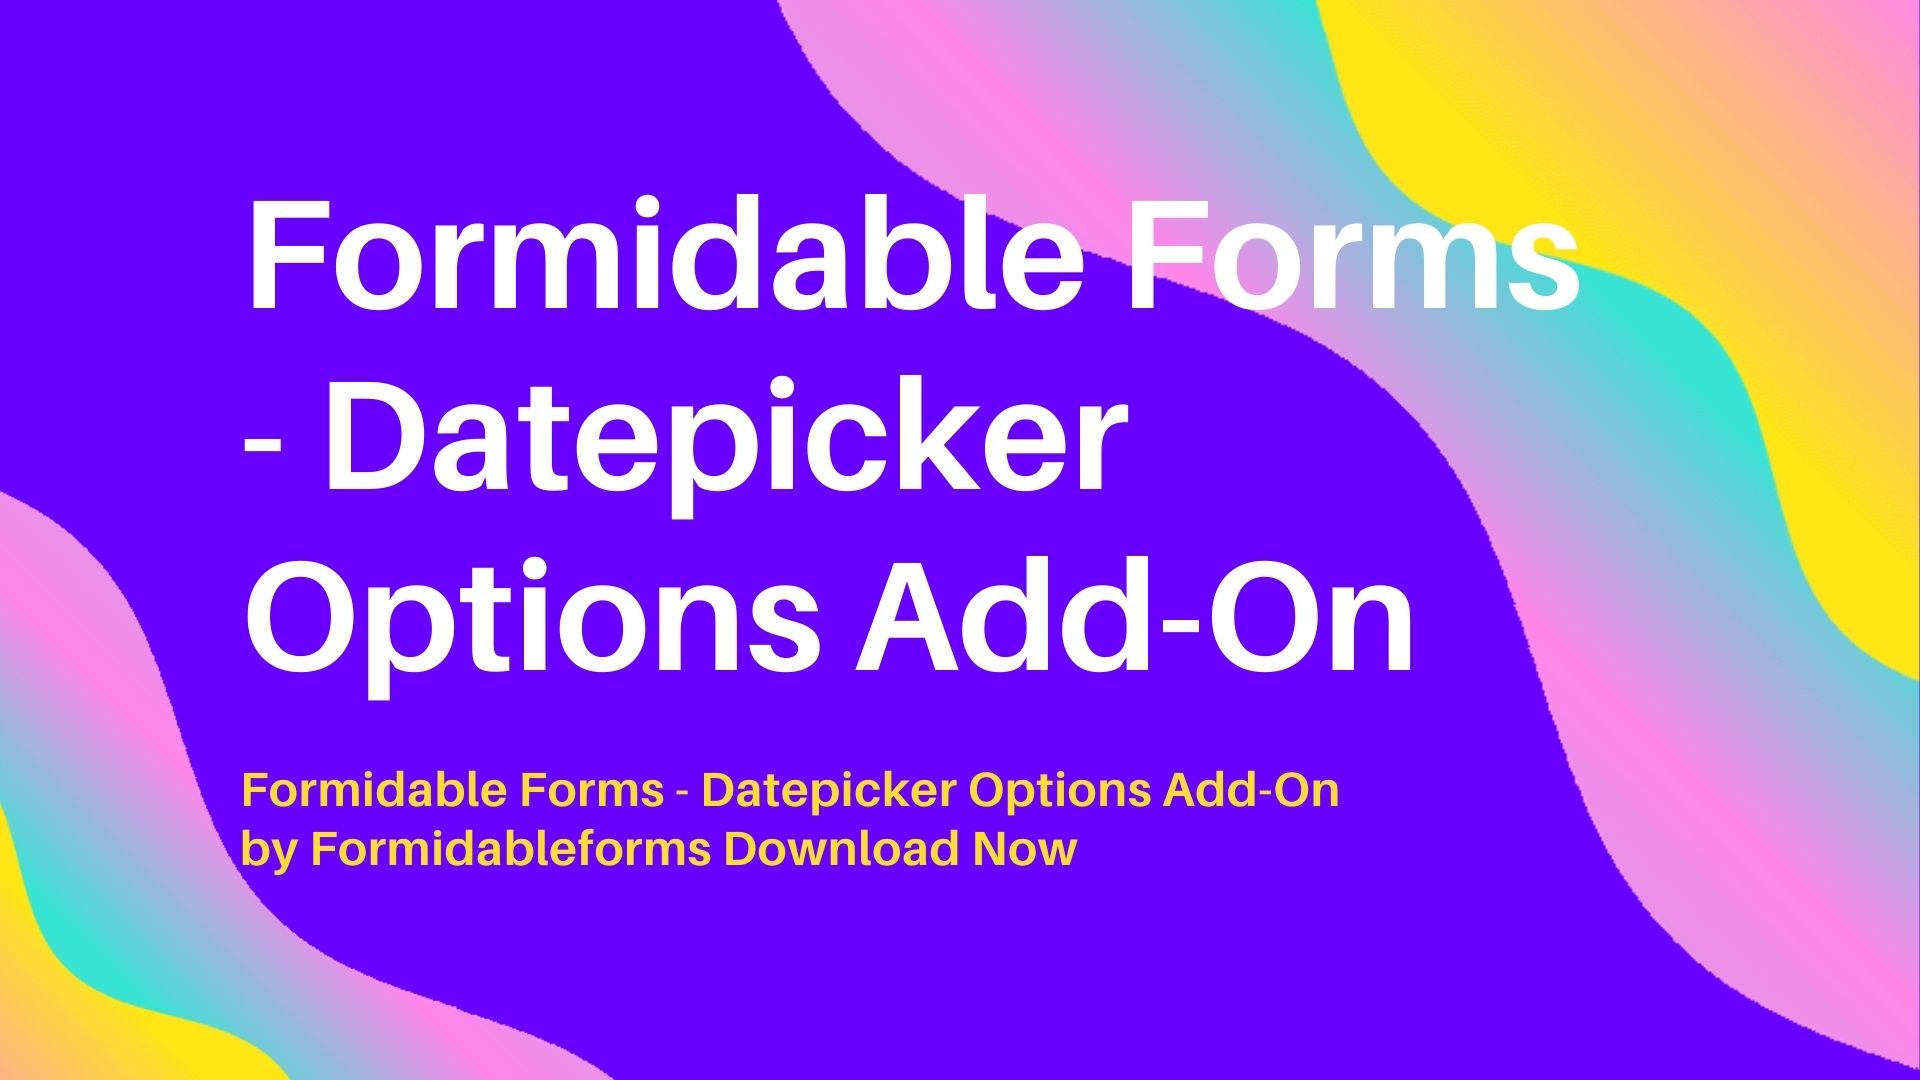 Formidable Forms - Datepicker Options Add-On